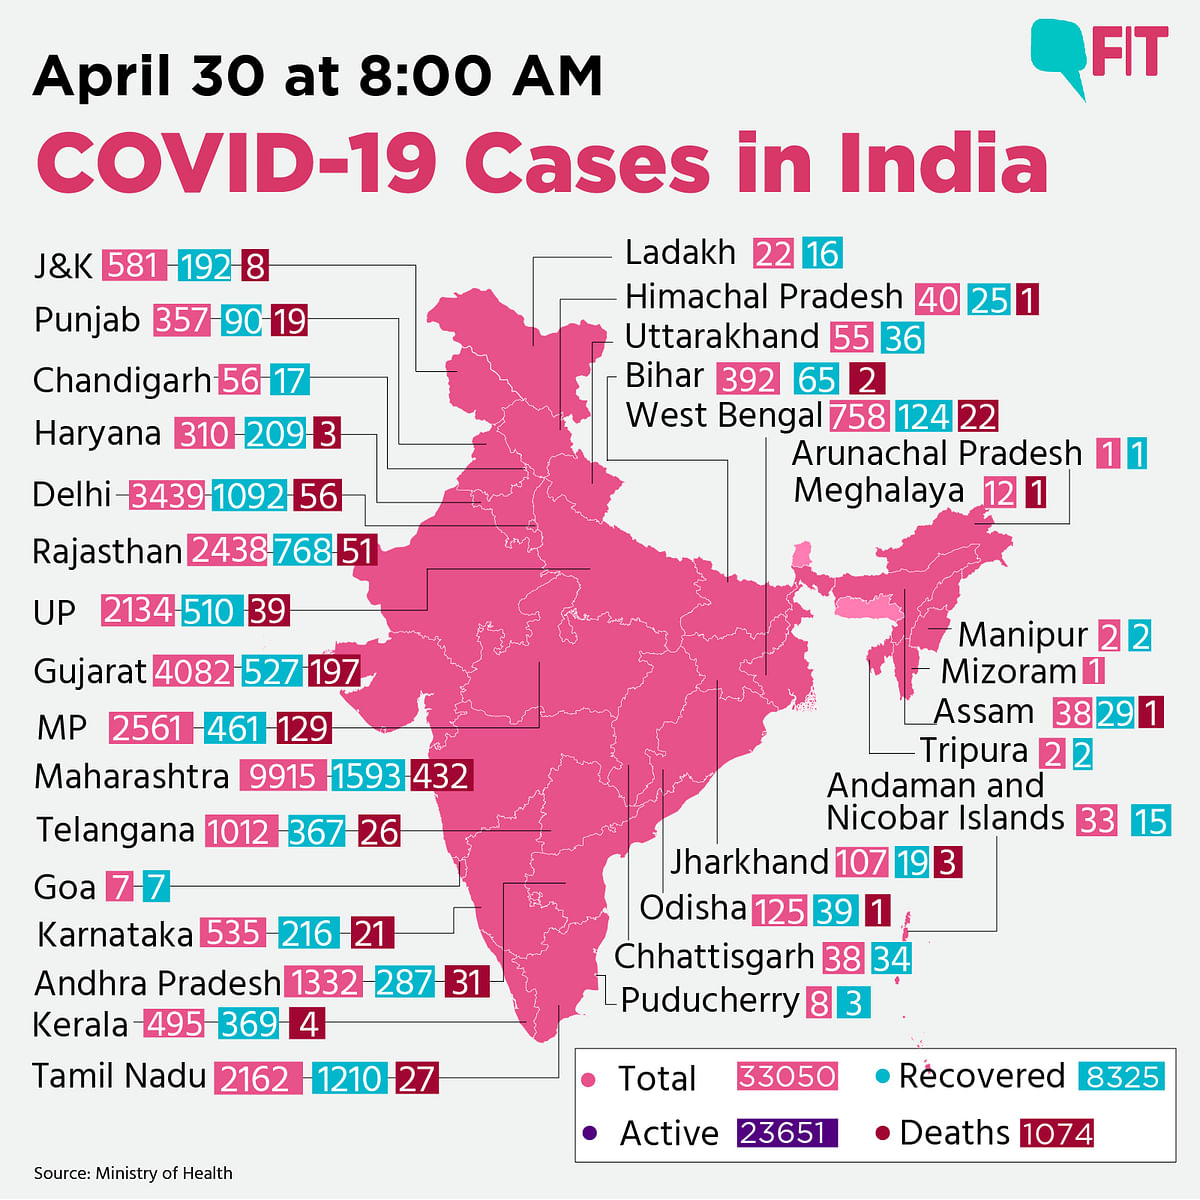 COVID-19 India Update: Death Toll Rises to 1,074, Cases at 33,050